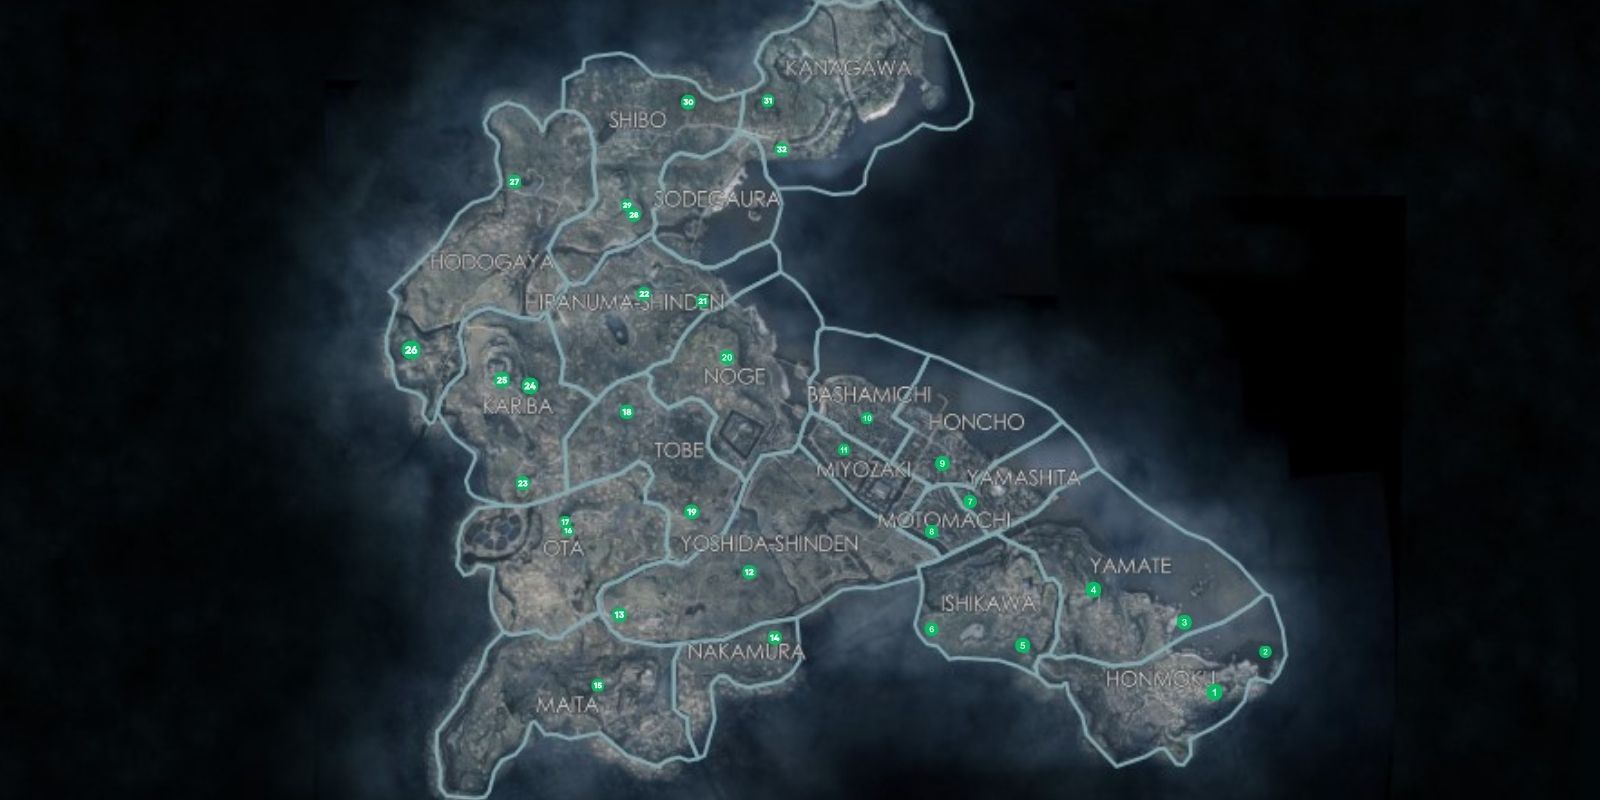 The Rise Of The Ronin character is displaying the locations of all the Fugitives in Yokohama Region.